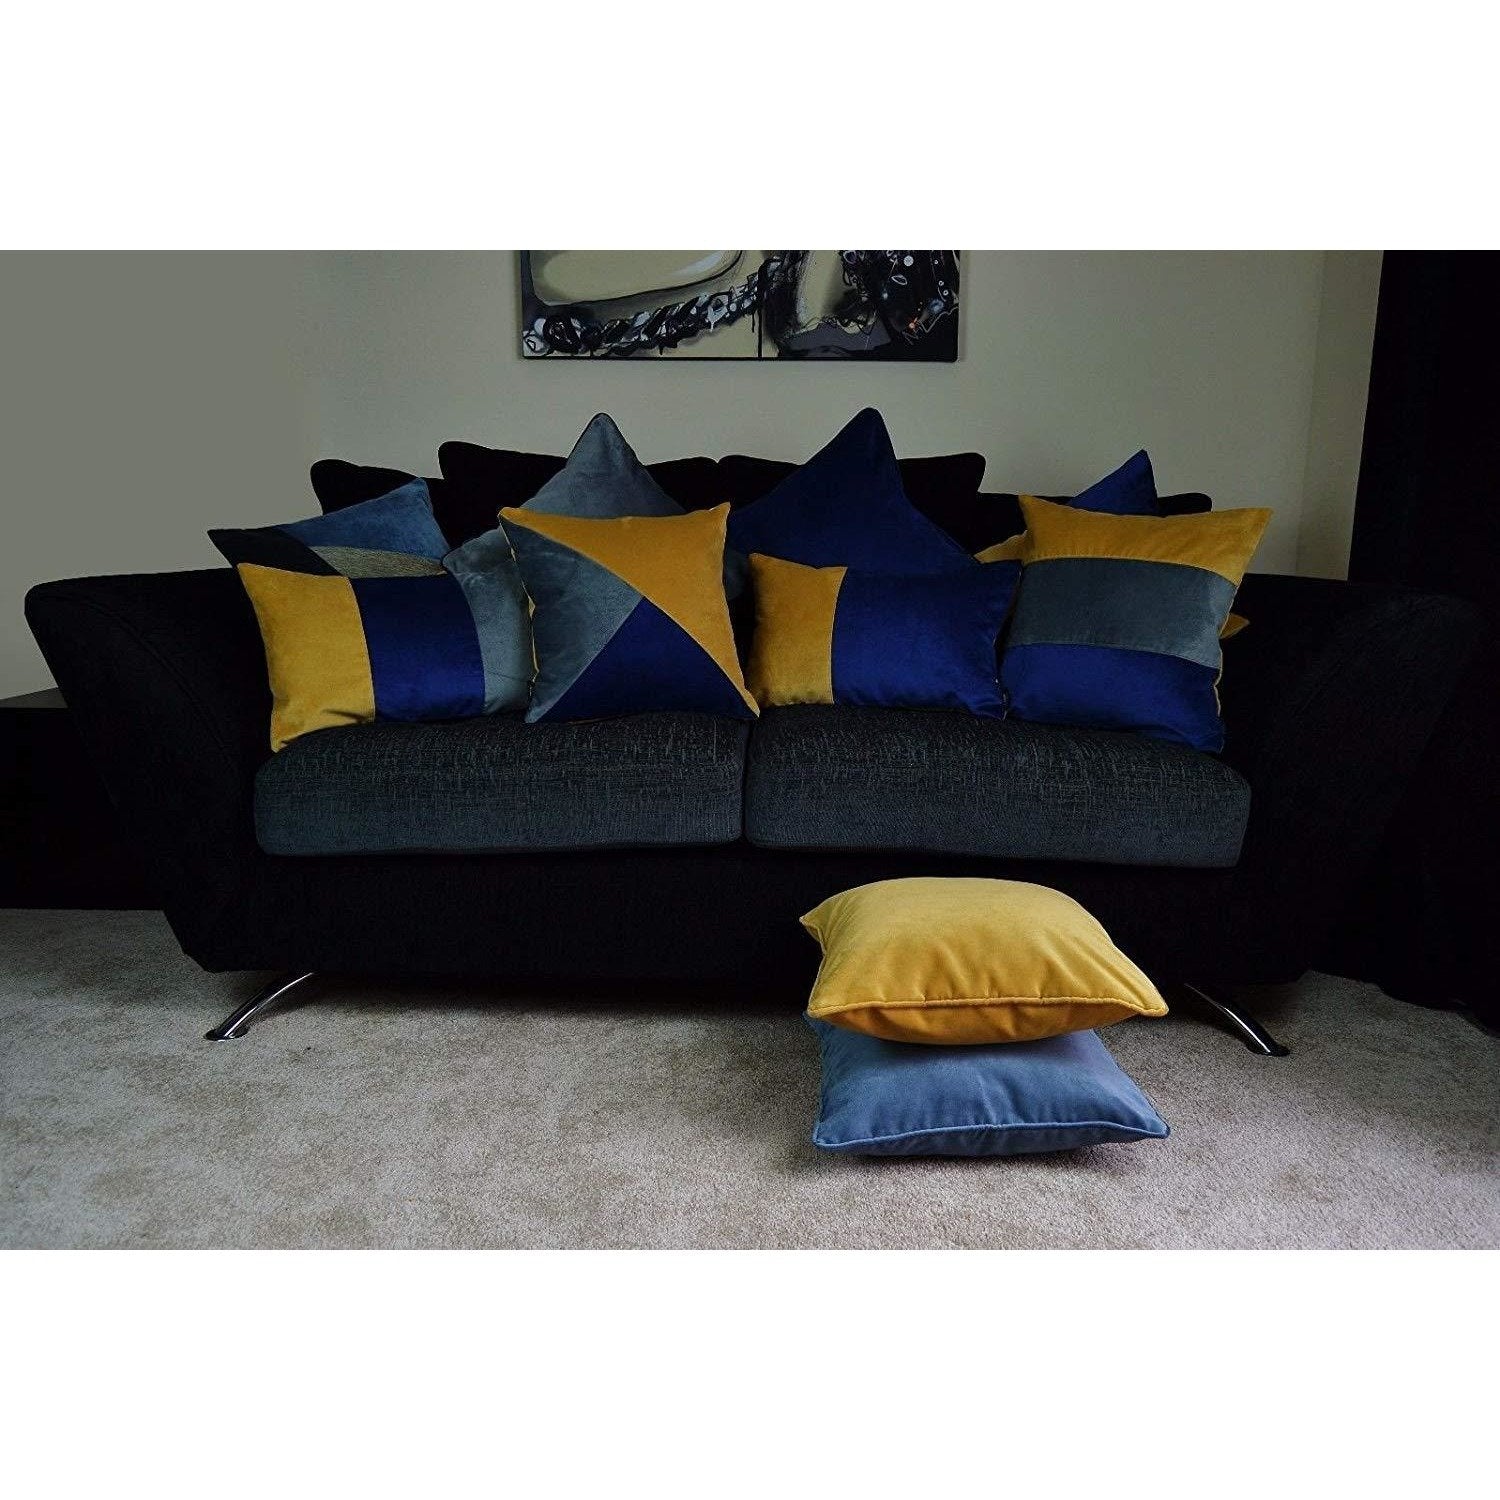 McAlister Textiles Triangle Patchwork Velvet Navy, Yellow + Grey Cushion Cushions and Covers 